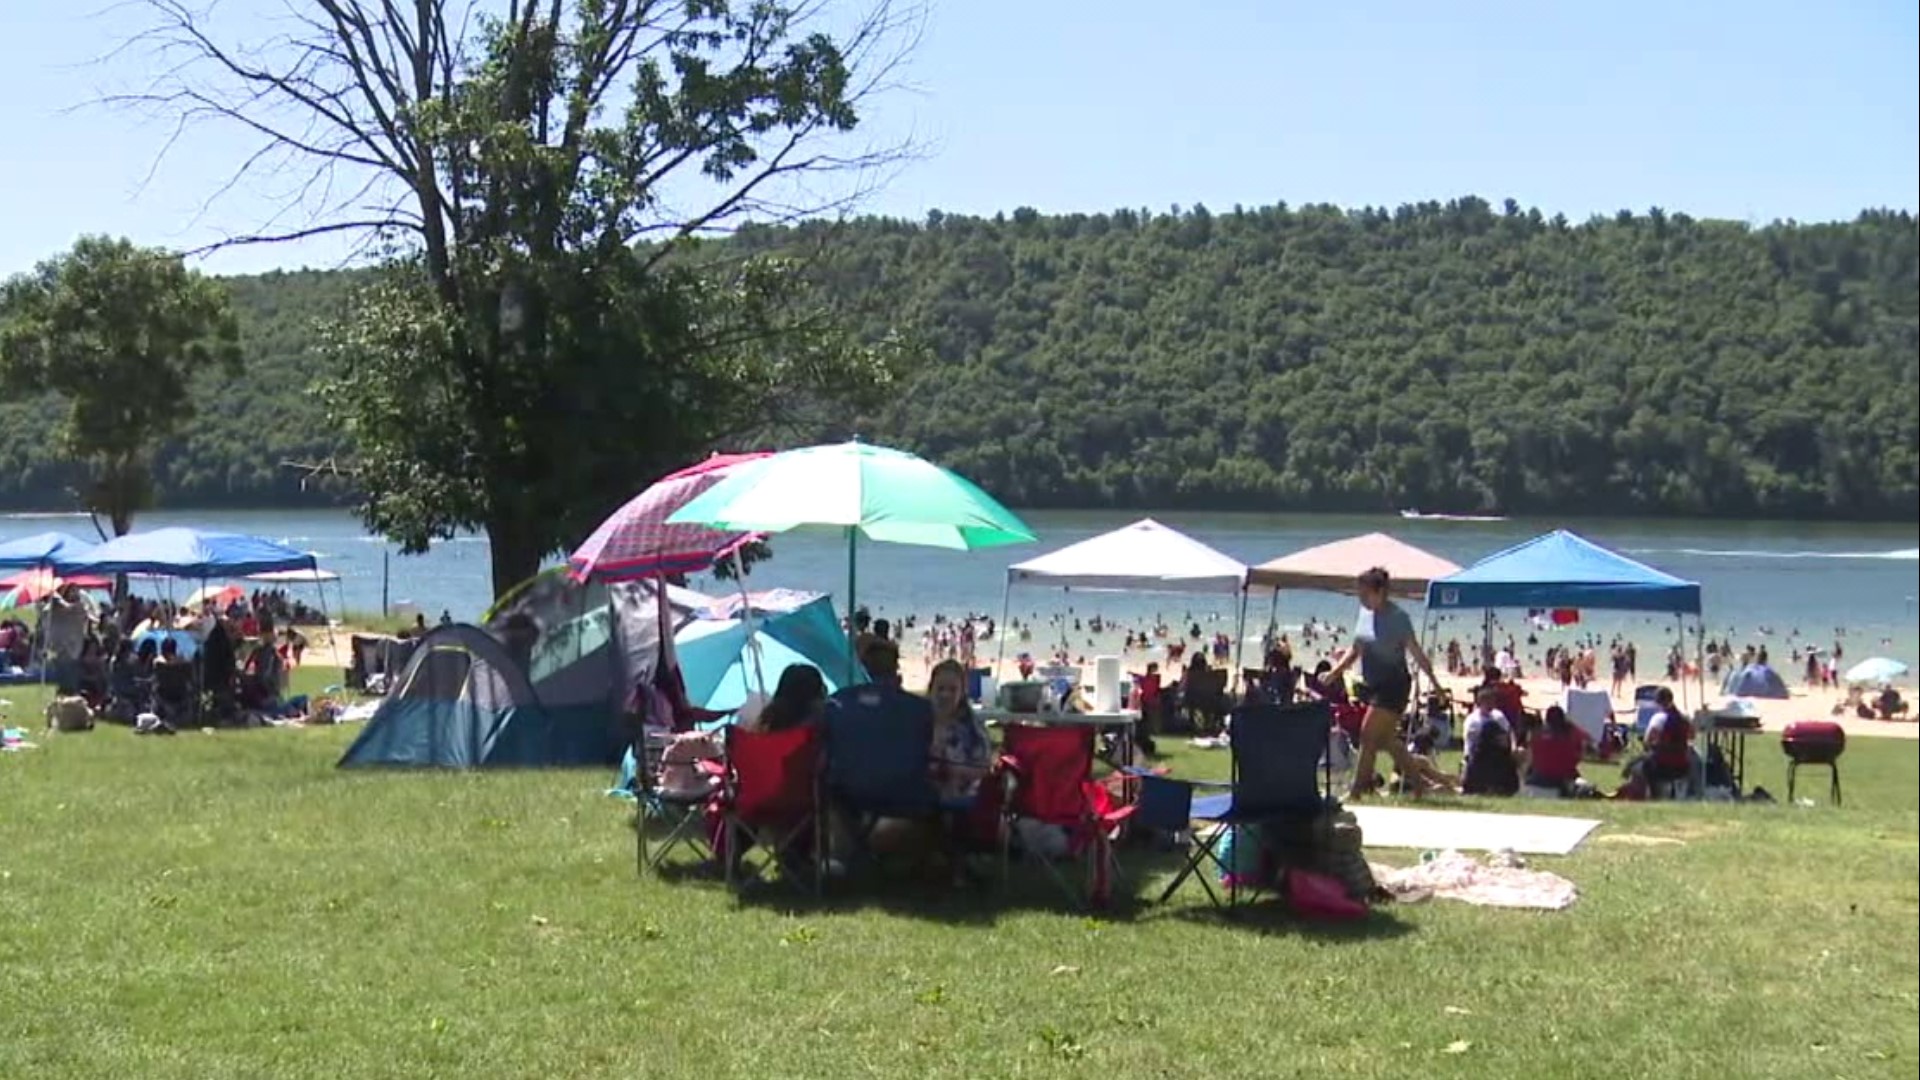 Beltzville State Park and nearby Mauch Chunk Lake both closed at full capacity at 9 am.